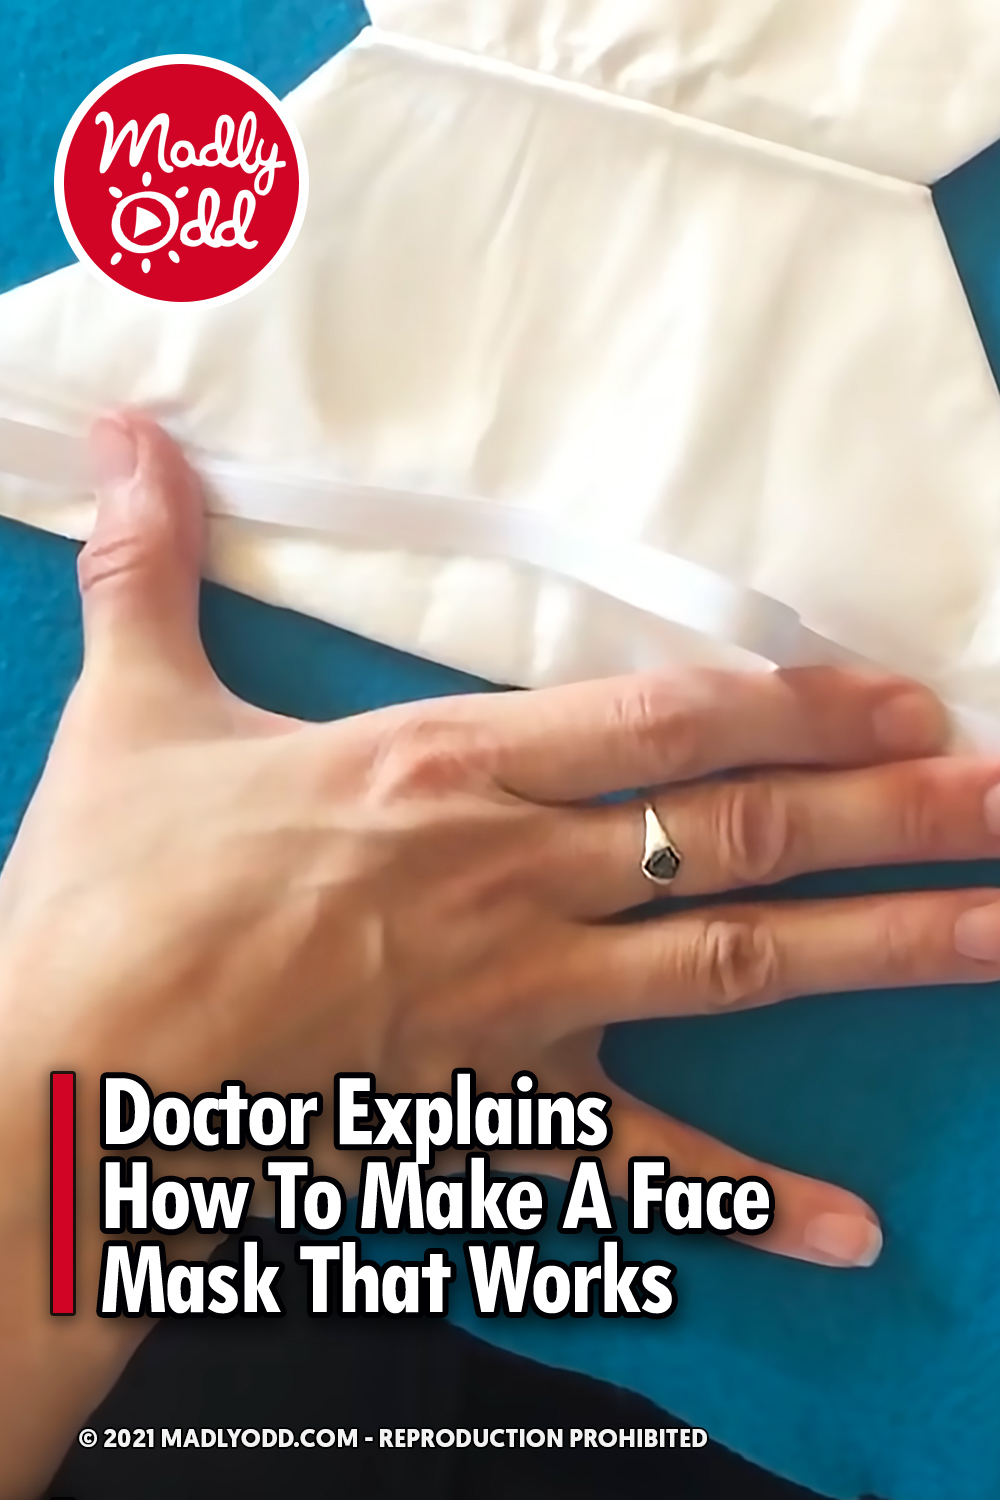 Doctor Explains How To Make A Face Mask That Works